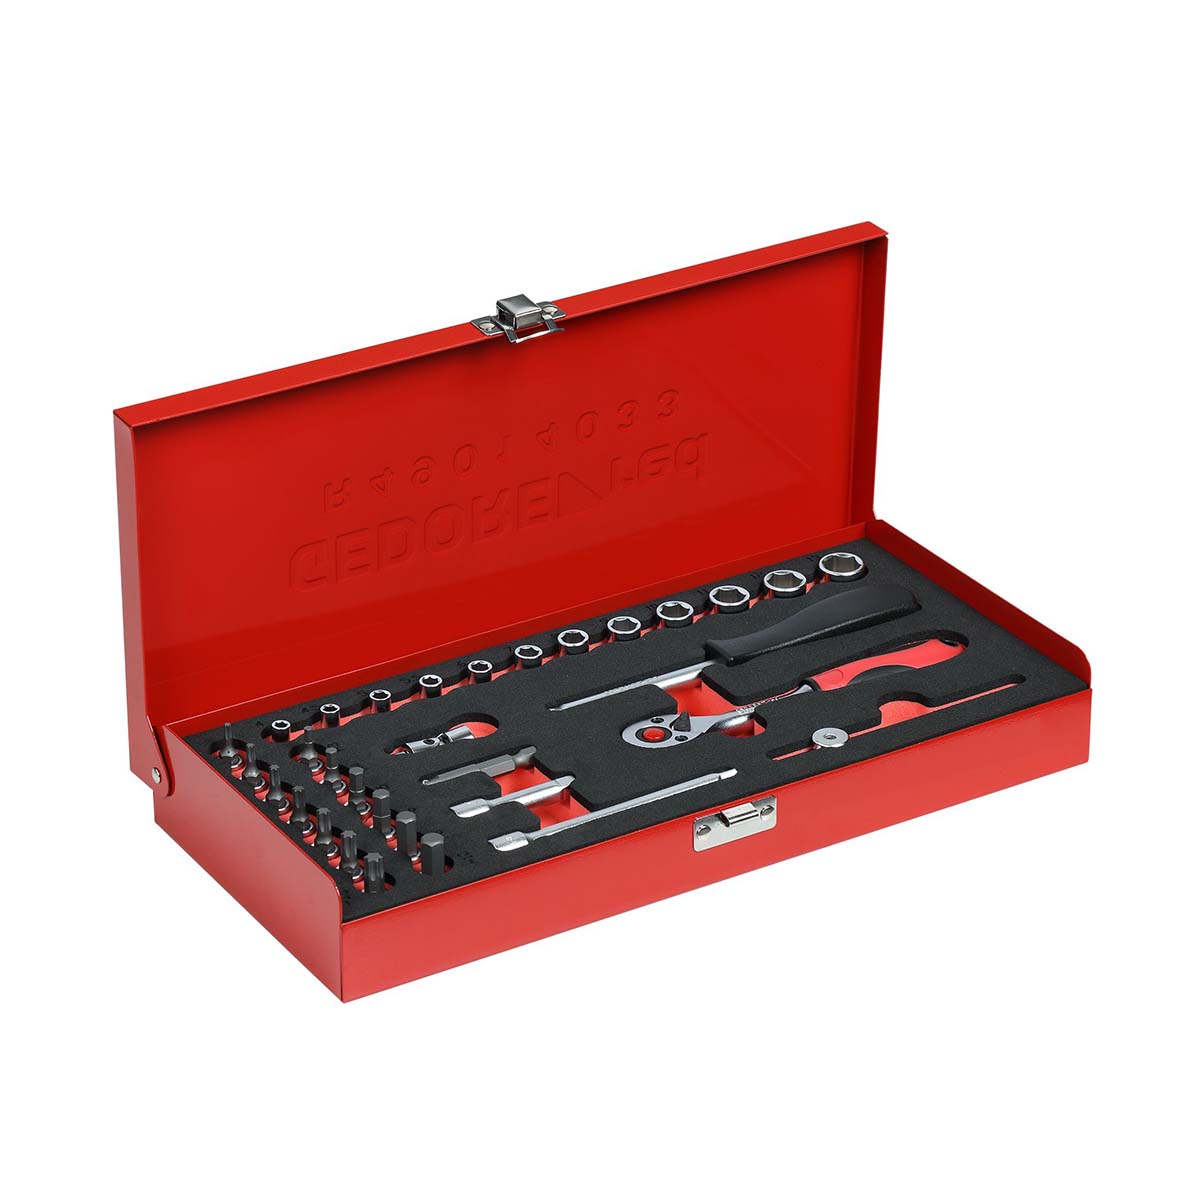 GEDORE red R49014033 - 1/4" socket set, 4-13 mm, 33 pieces (3300001)